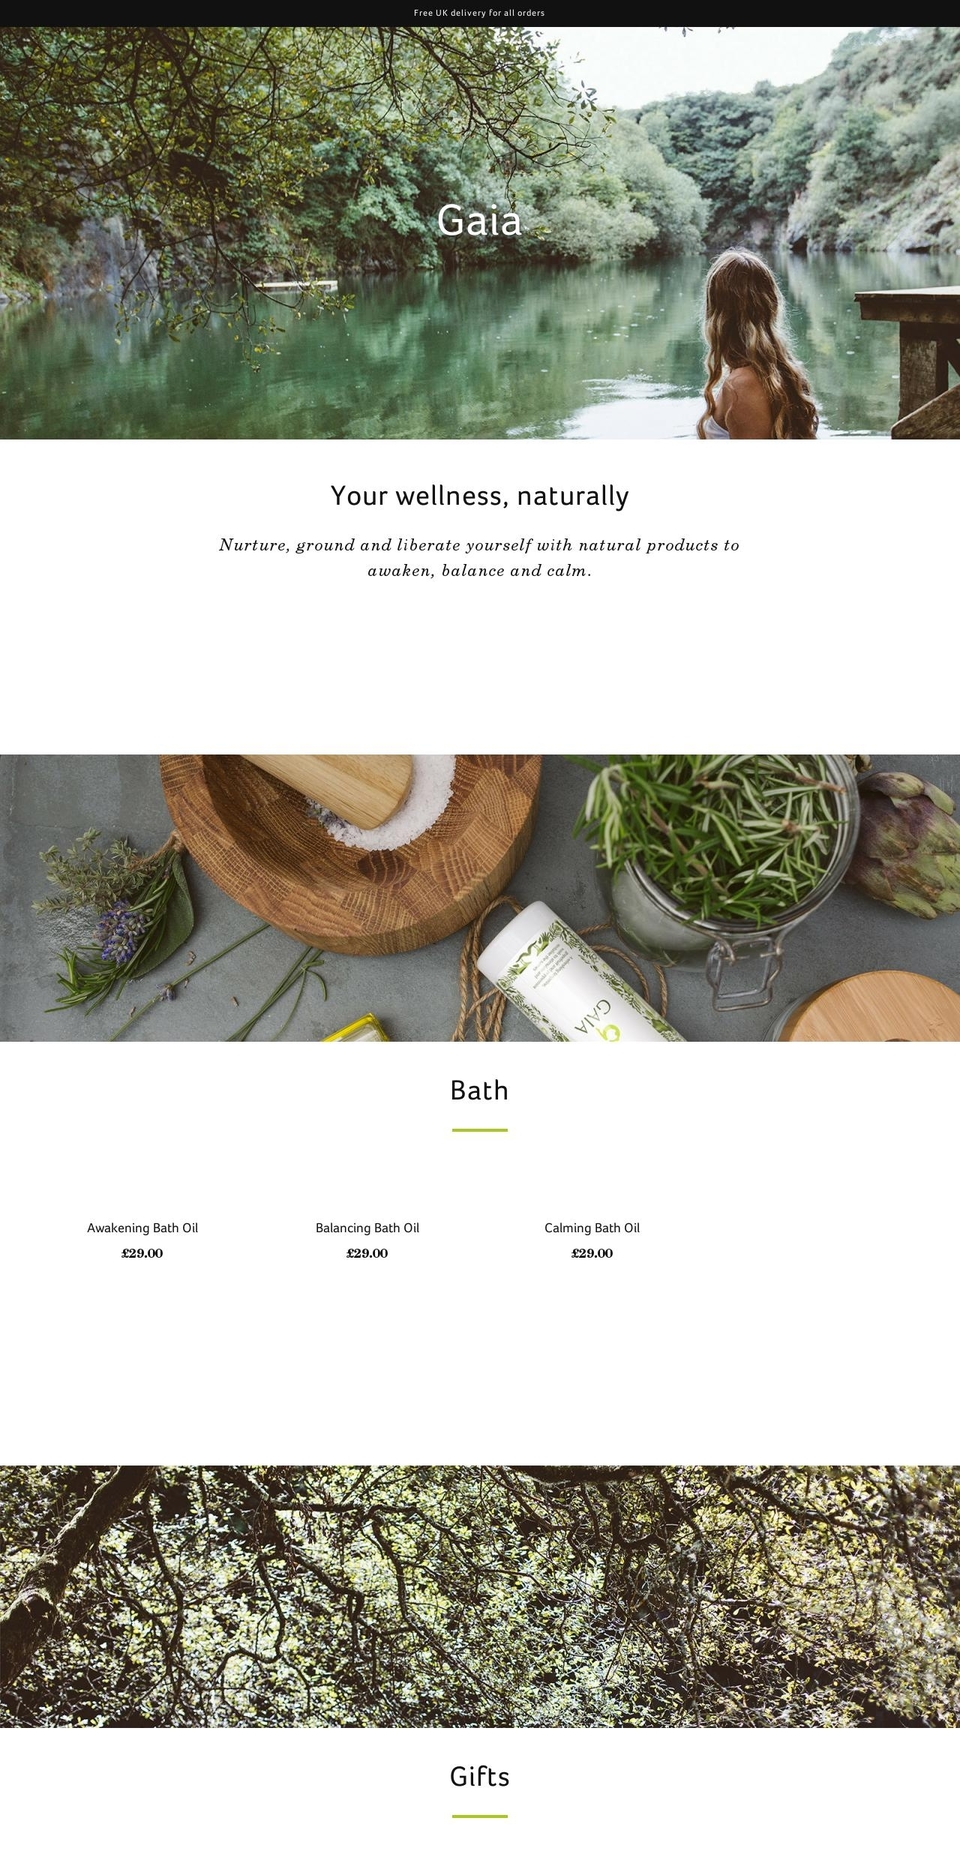 Be Yours Shopify theme site example gaia-spa.co.uk